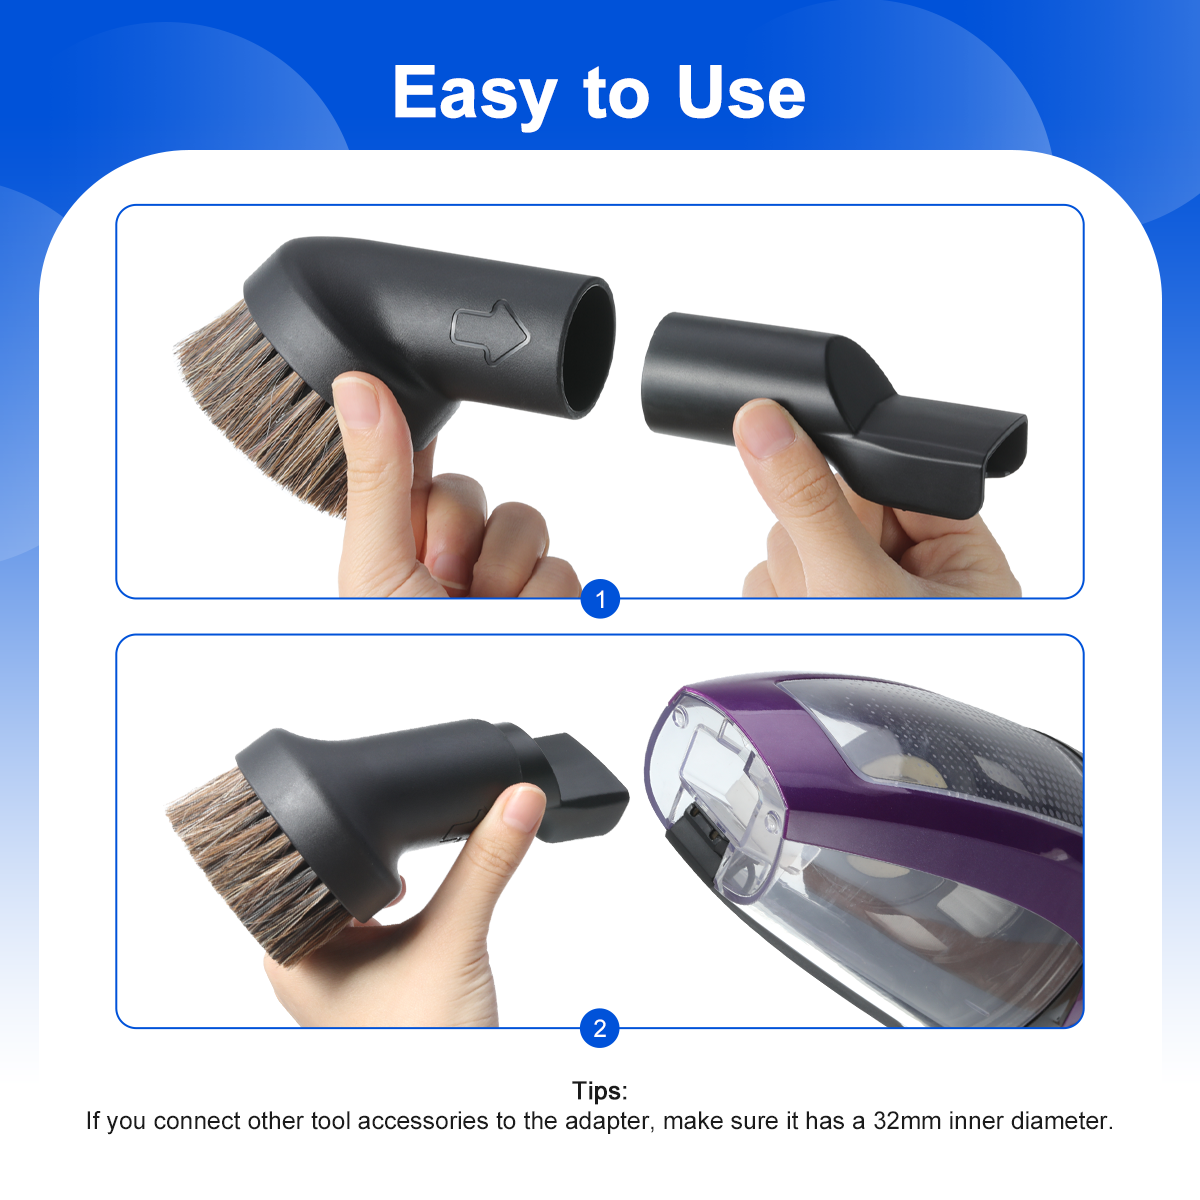 LANMU Horse Hair Brush accessory can be easily mounted on the vacuum cleaner. If you connect other tool accessories to the adapter, make sure it has a 32mm inne diameter.